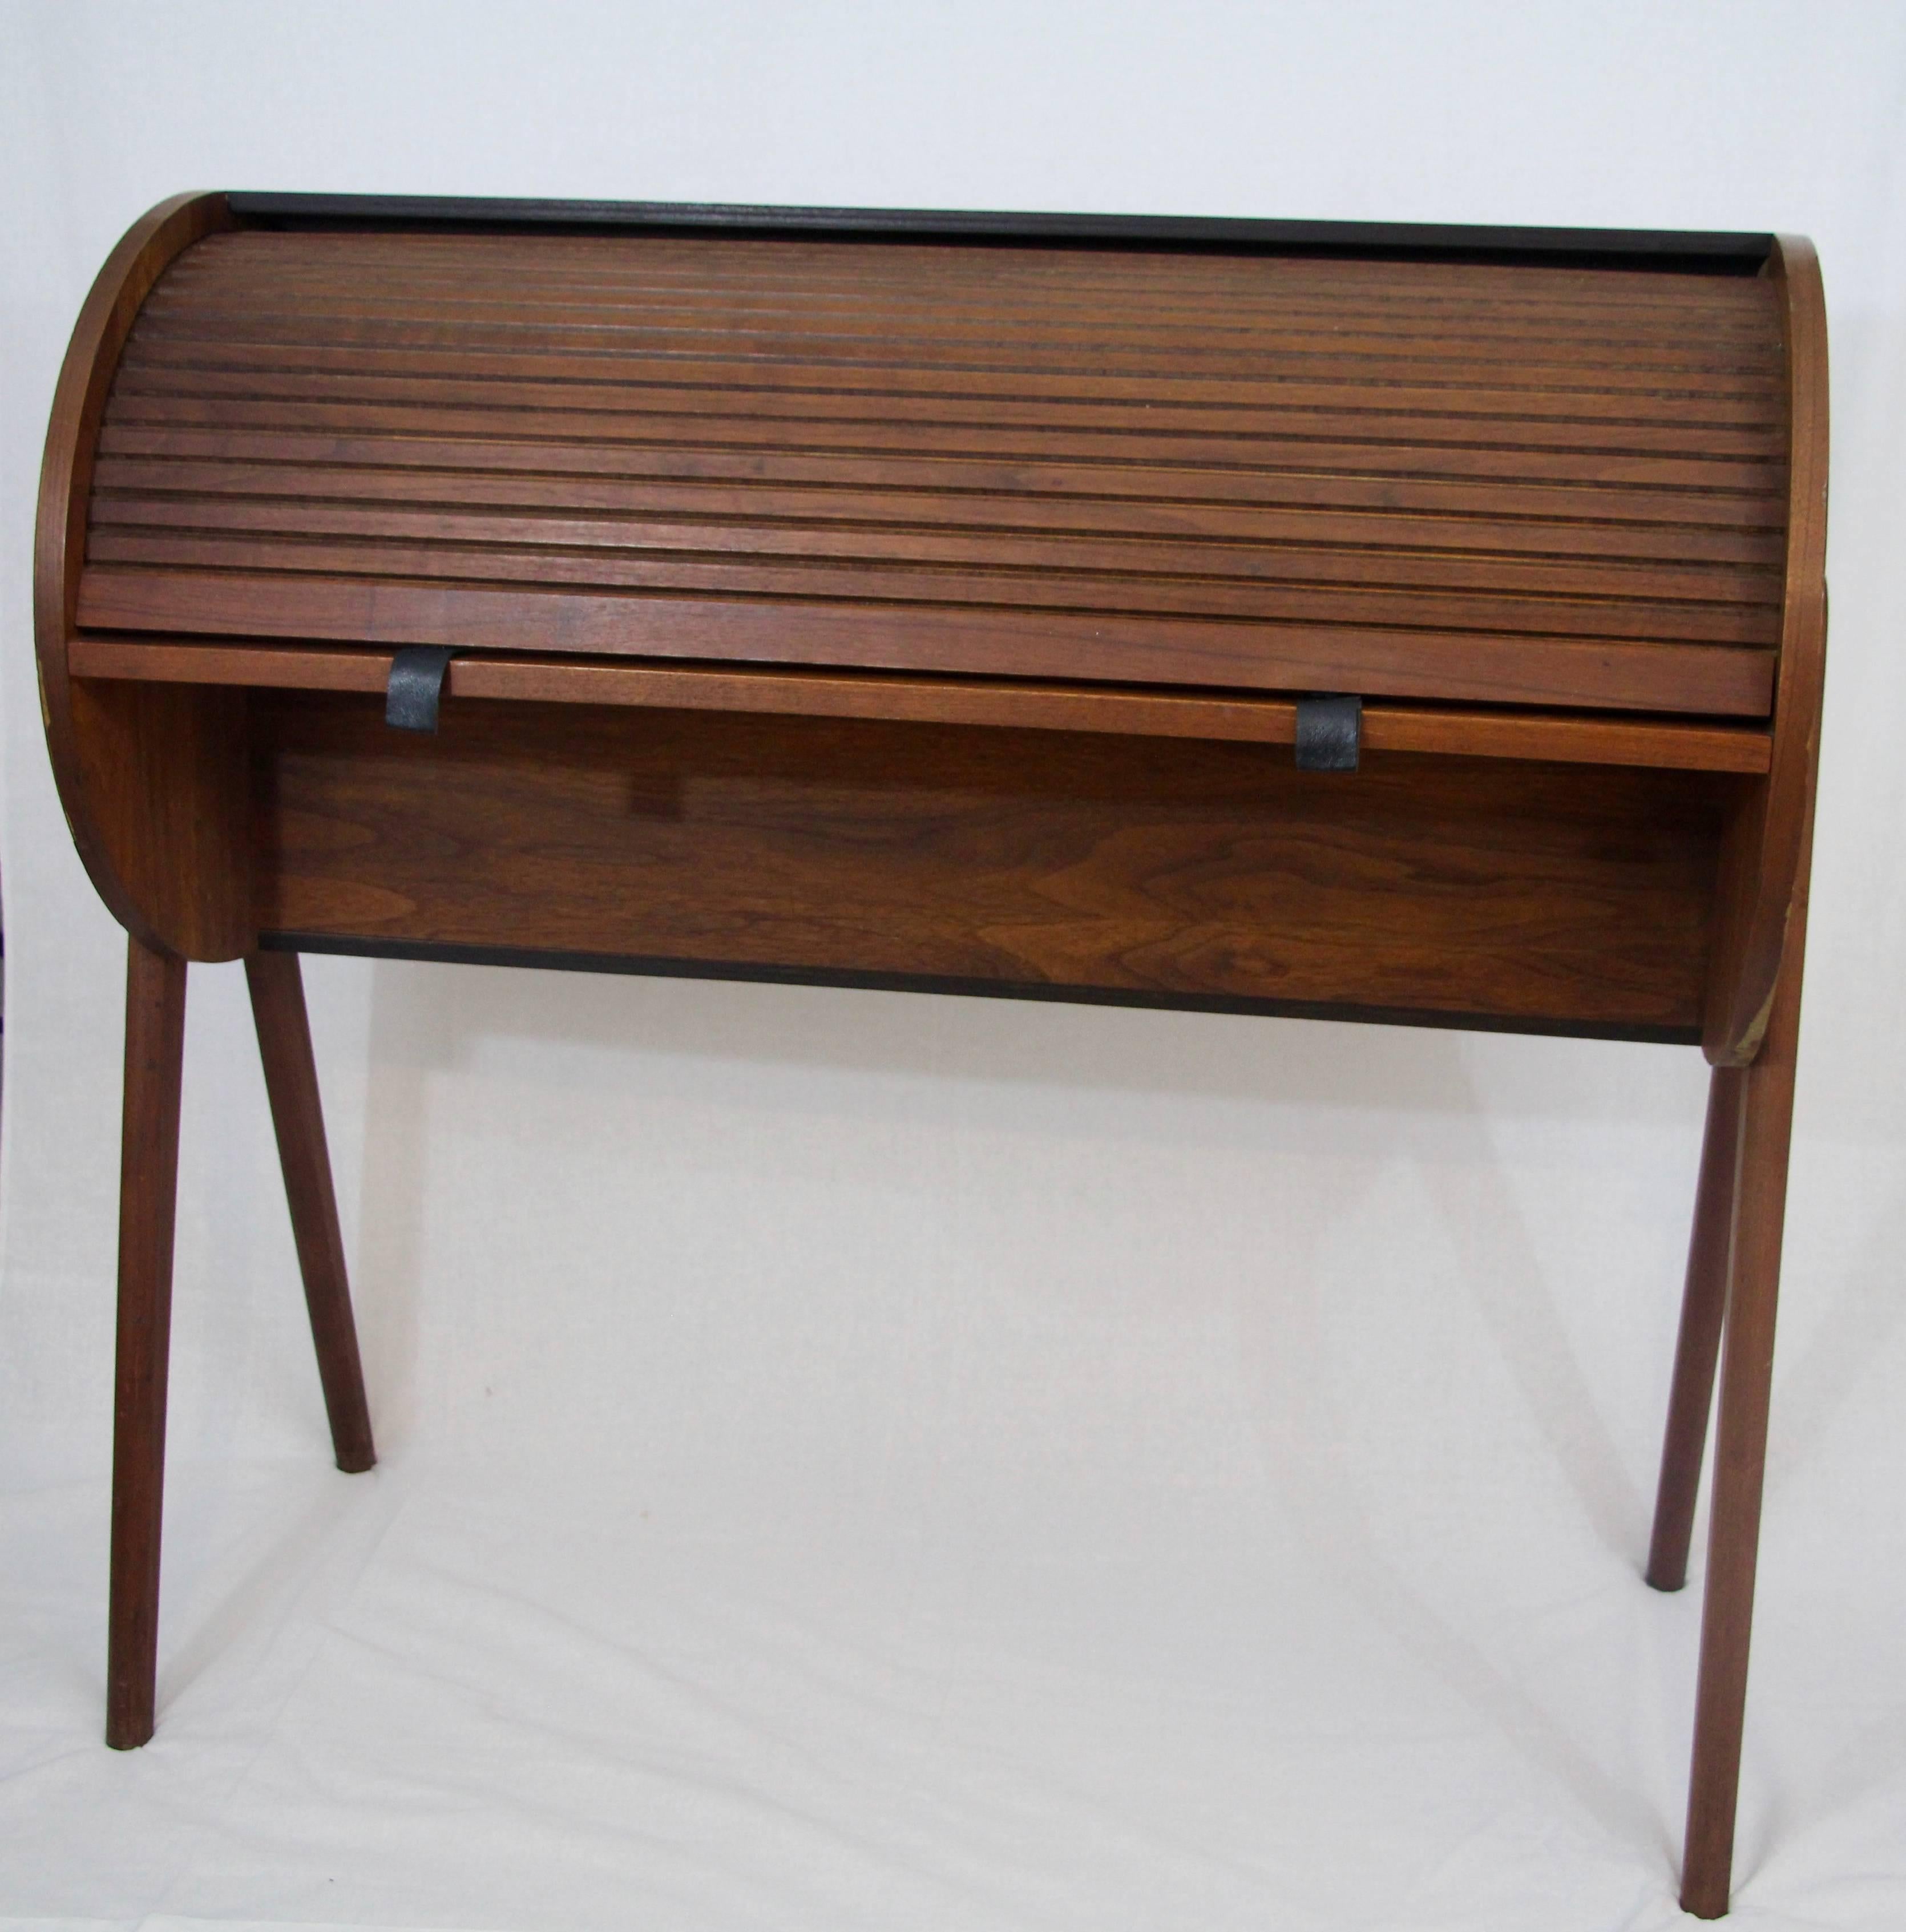 Original Rolltop desk, probably Denmark made in the second half of the 20th century, walnut.